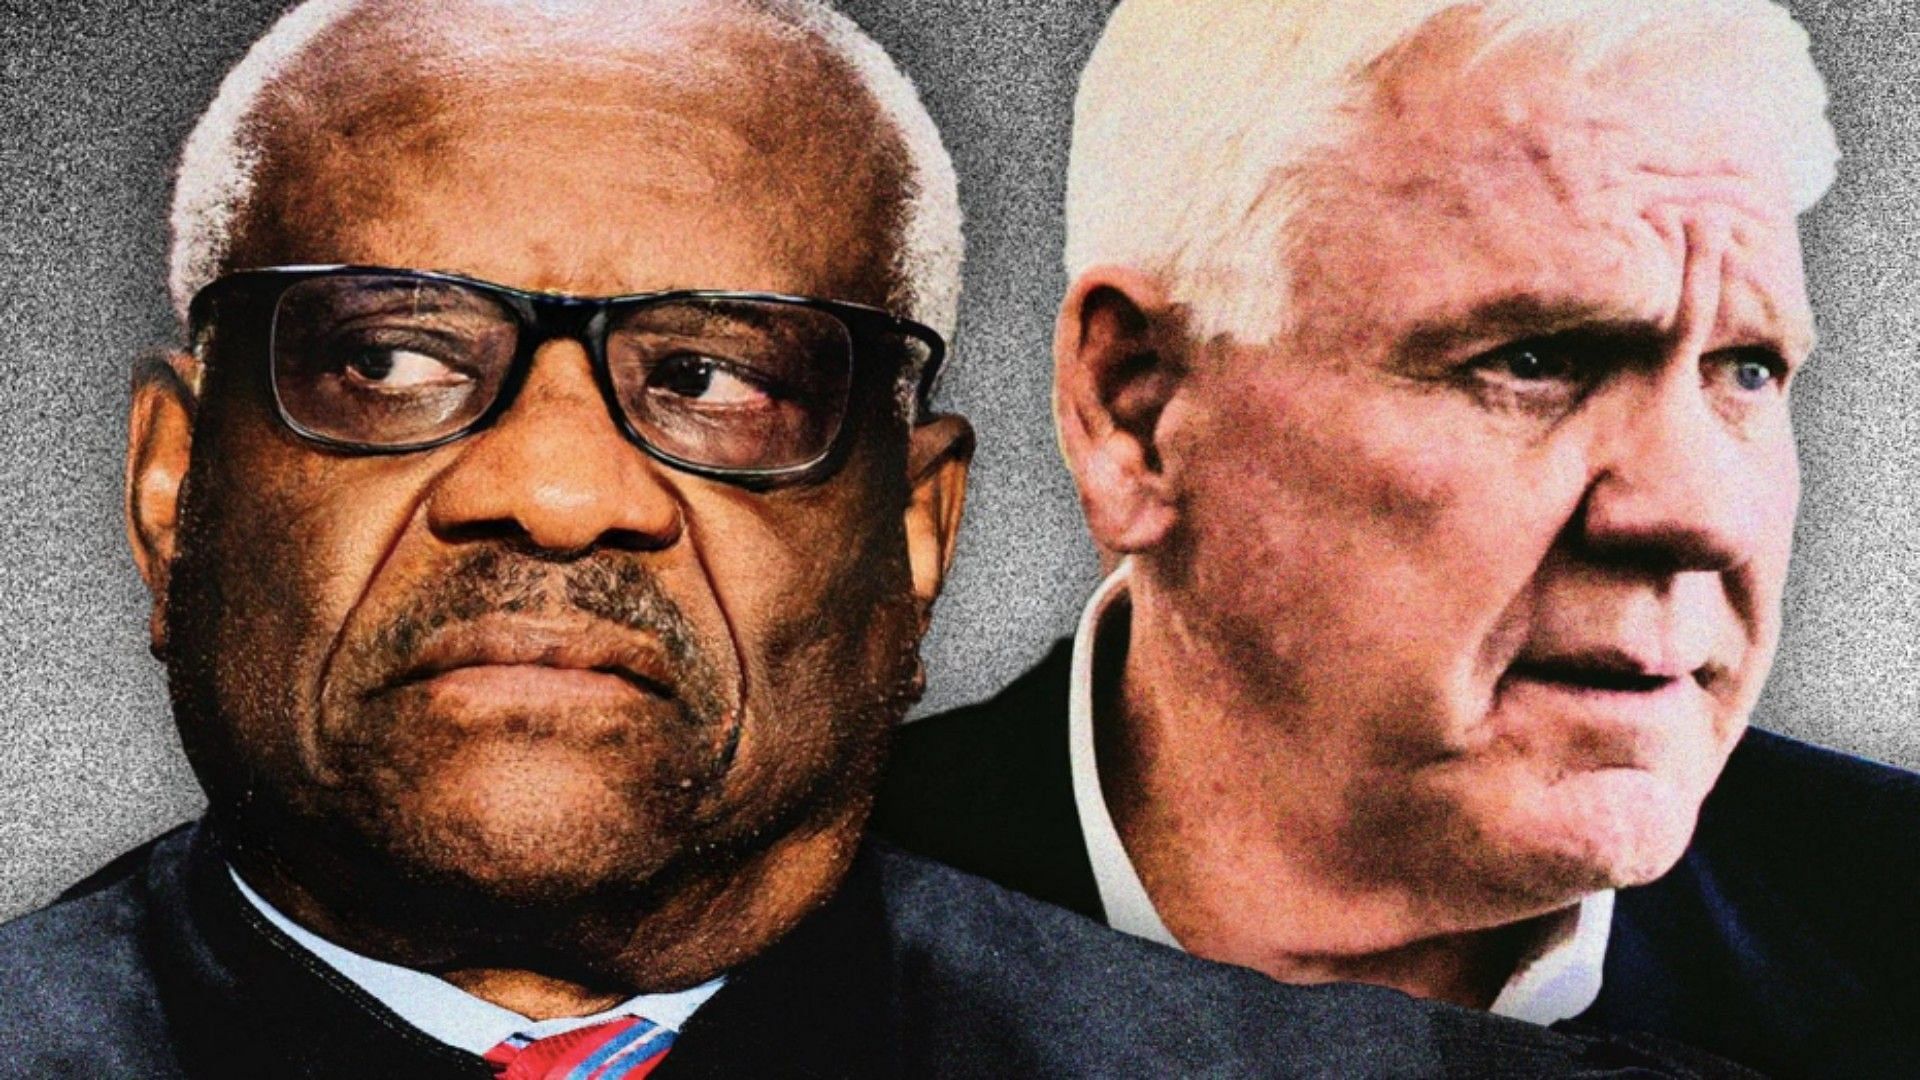 Clarence Thomas and Harlan Crow (Image via Call To Activism/Twitter)